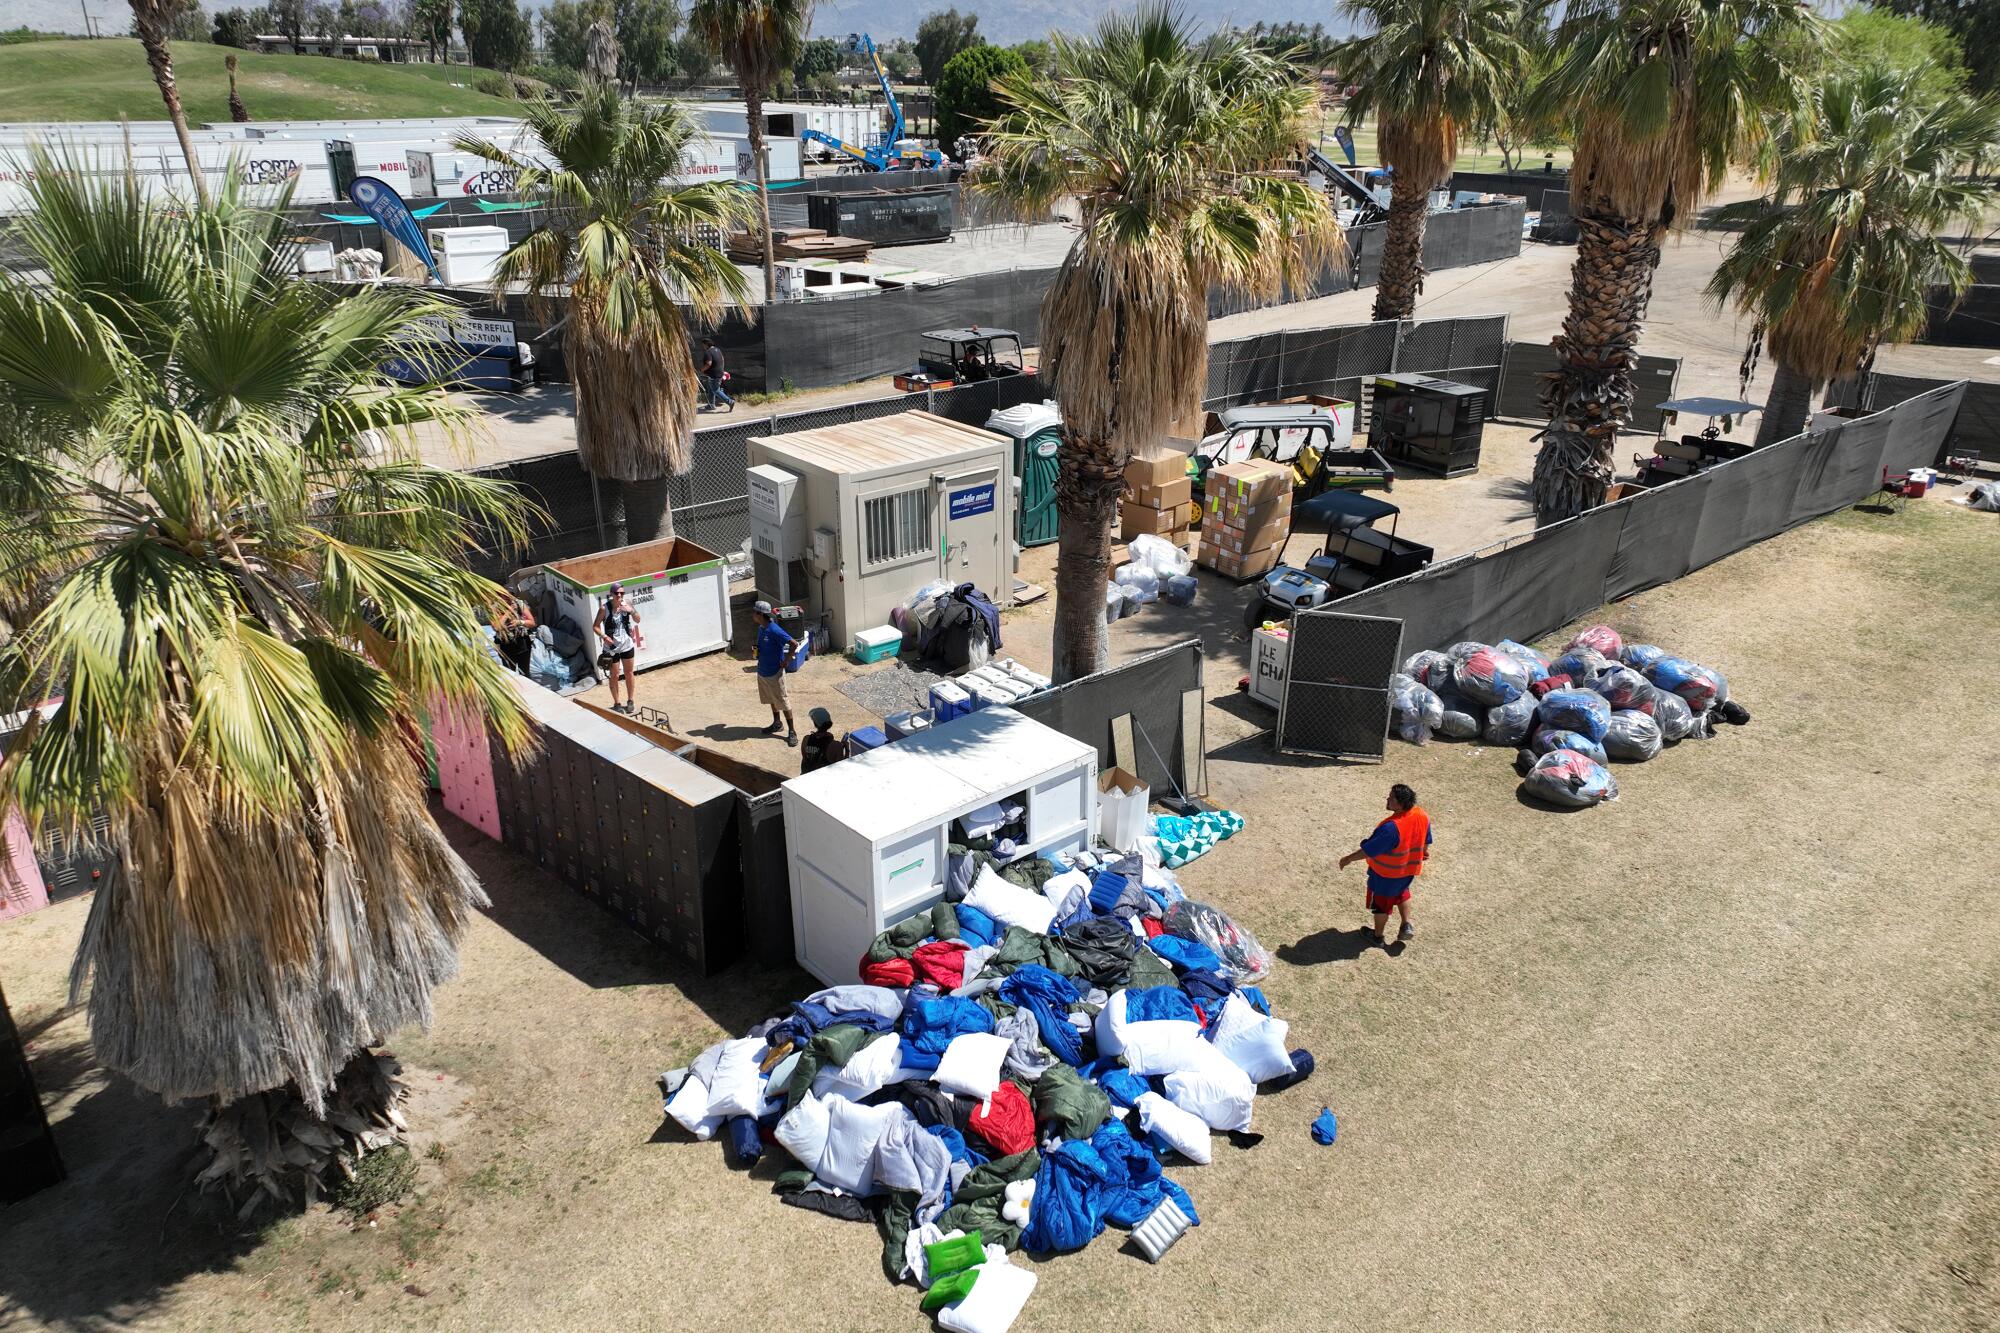 A large pile of sleeping bags, pillows and bedding left behind in the camping area after the 